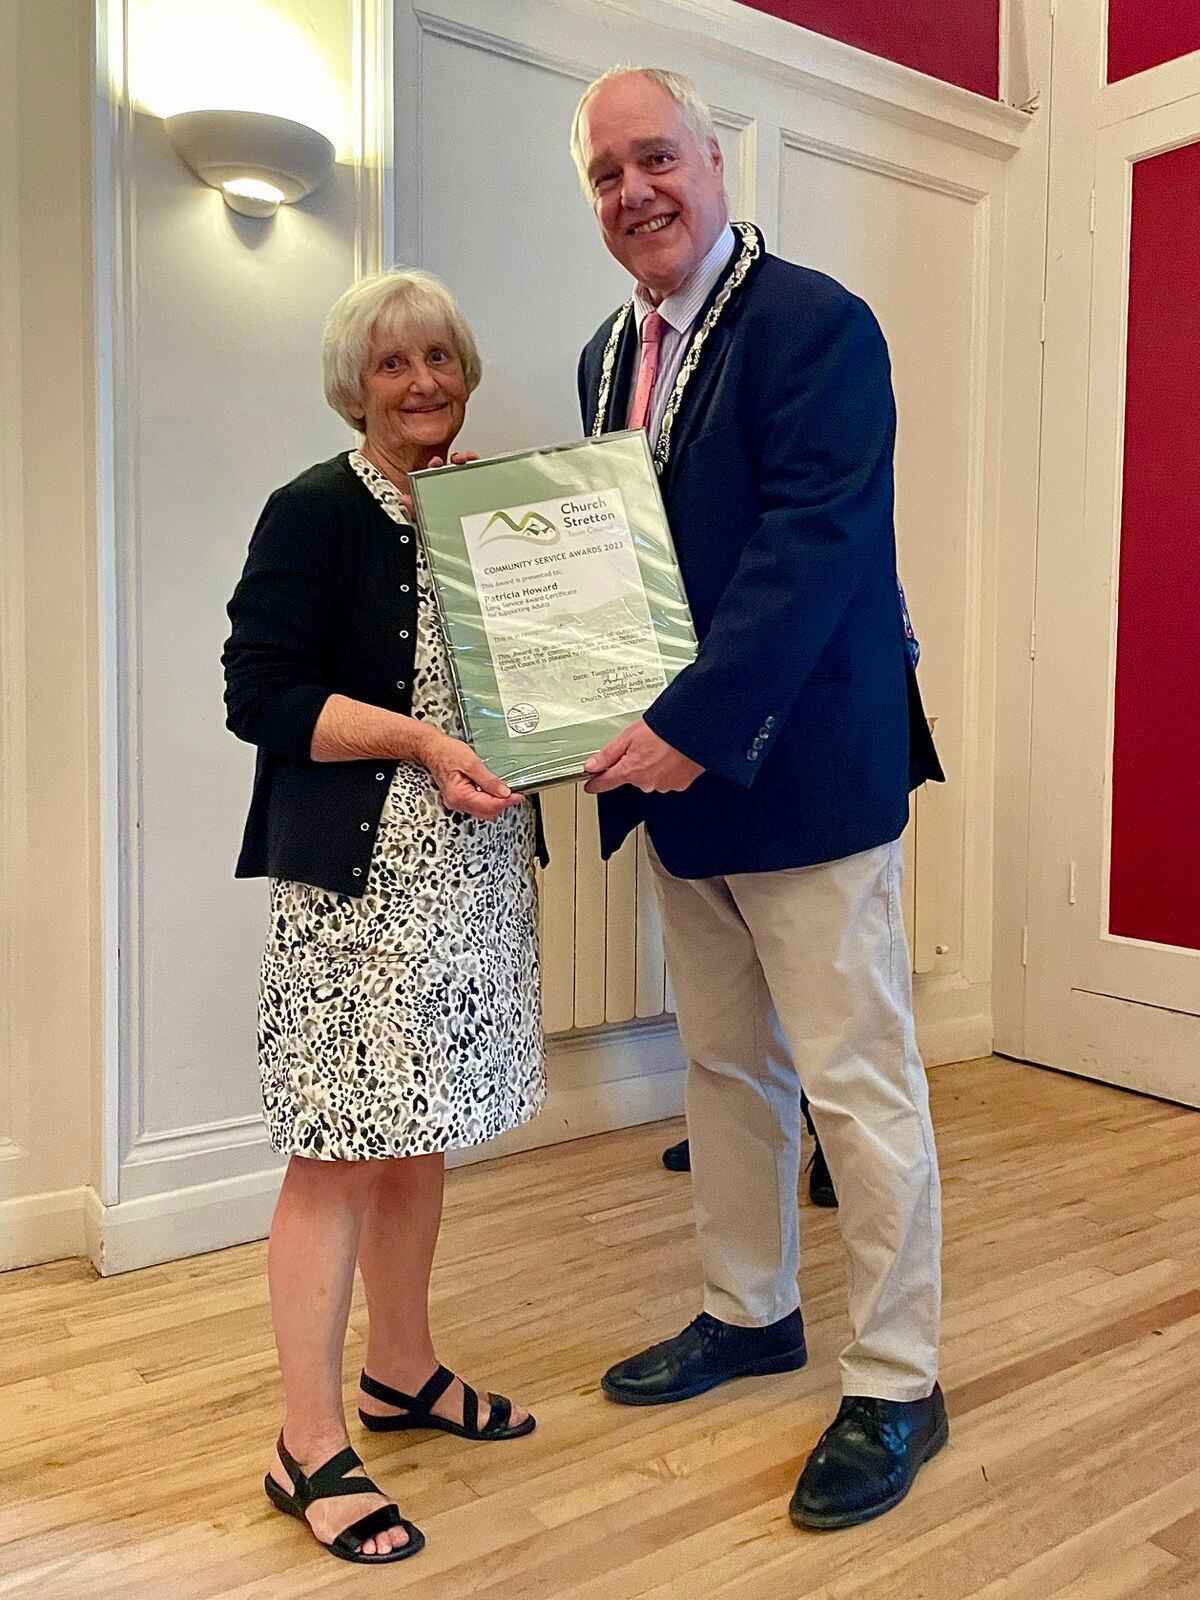 Trish Howard and Mayfair Health Walk leaders were given the Long Service Award for working with adults. It was received on her behalf by another volunteer Lesley Goodwin pictured with mayor Andy Munro